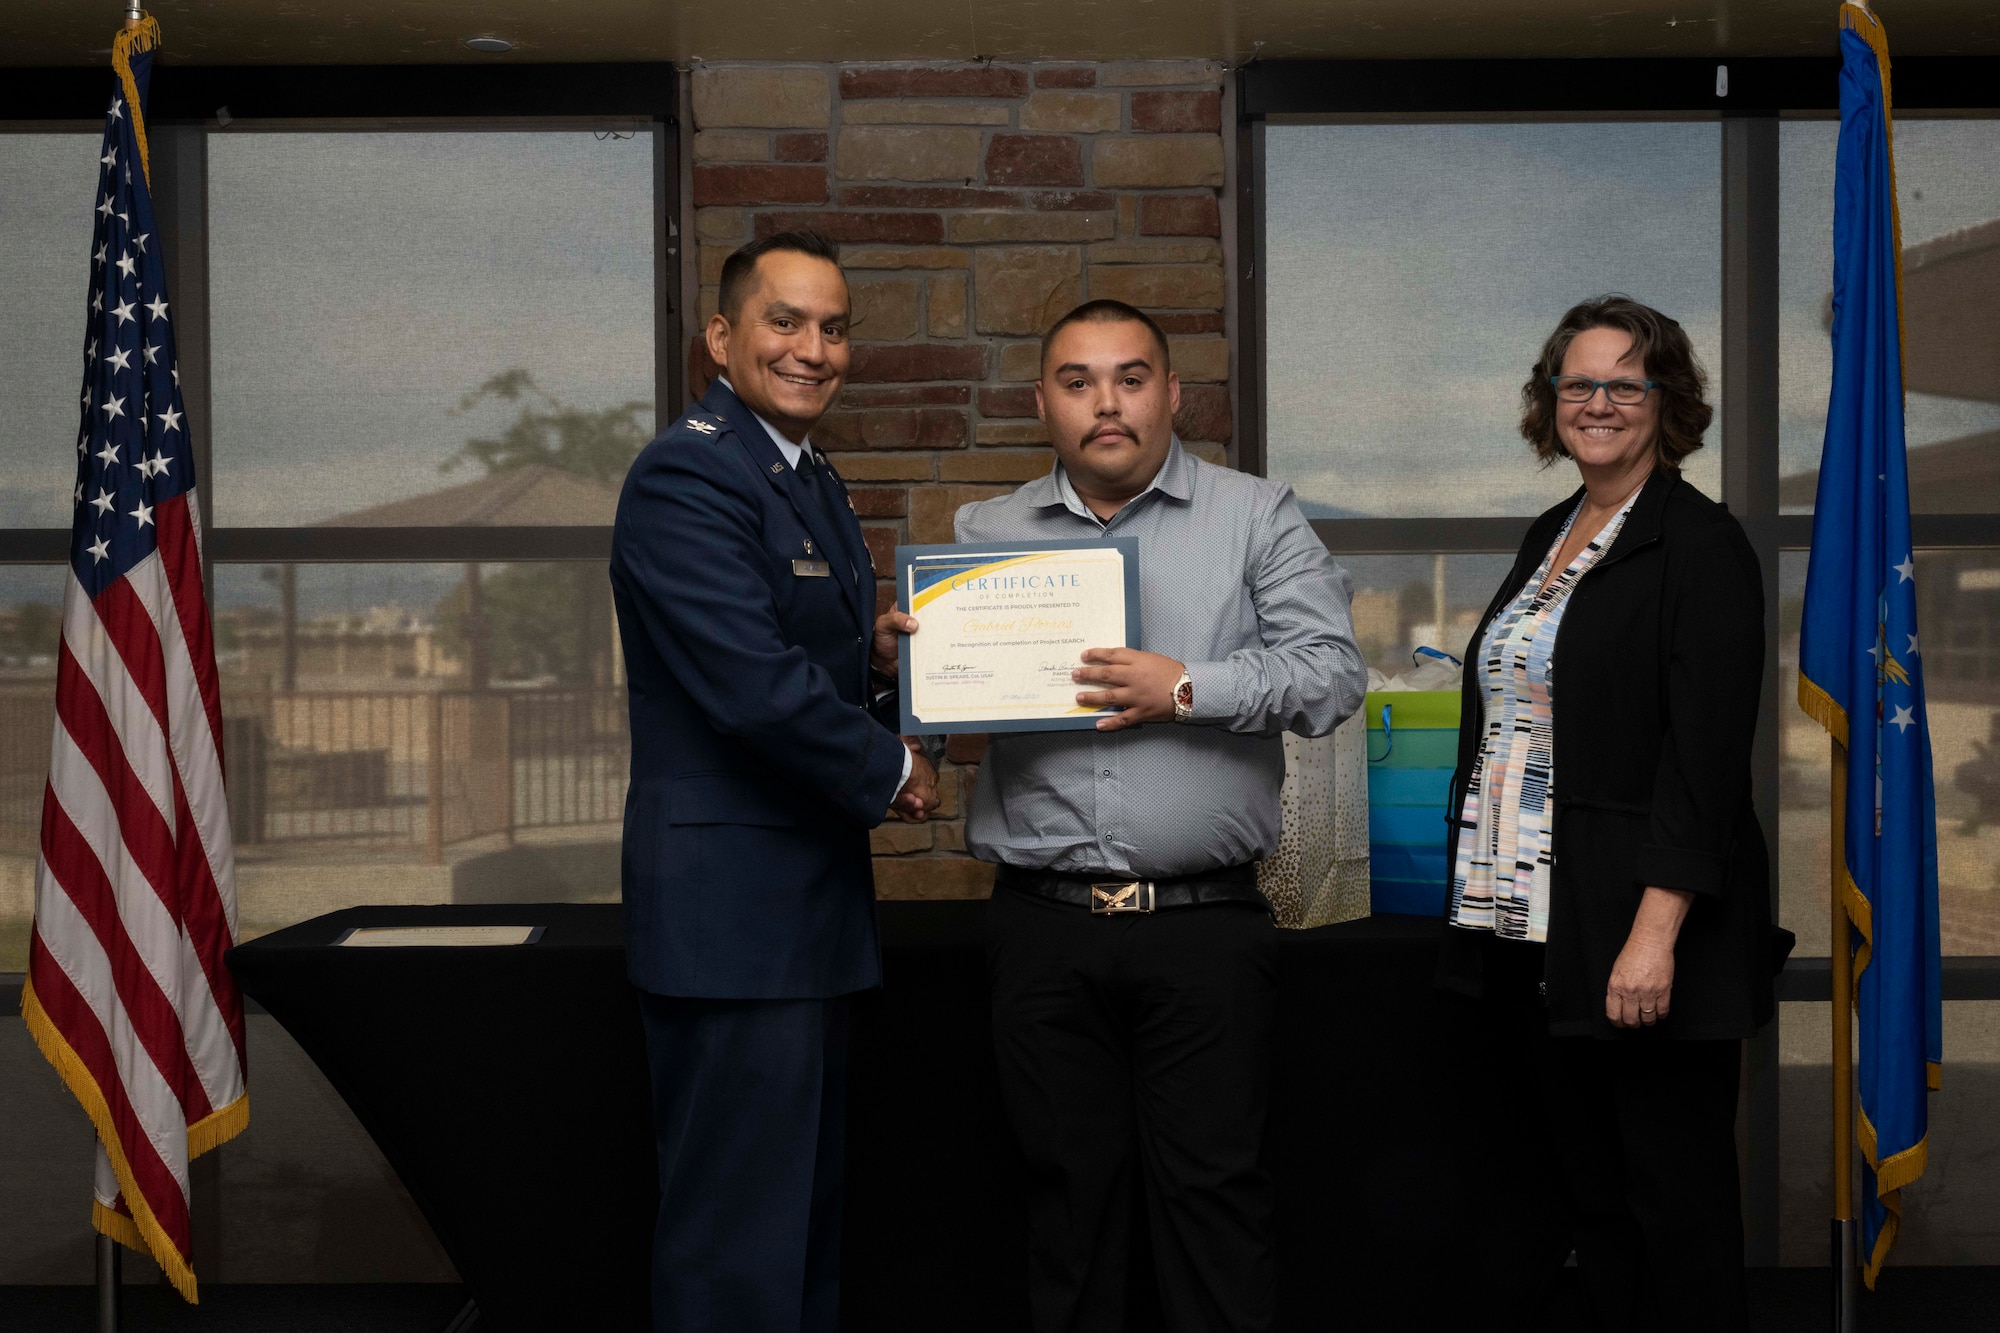 Gabriel Porras, Project SEARCH intern, accepts a graduation certificate for completing the Project Search program at Holloman Air Force Base, New Mexico, May 18, 2023.  Project SEARCH integrates 18-22 year olds with disabilities into working environments to help them gain valuable work experience.  (U.S. Air Force photo by Airman 1st Class Michelle Ferrari)